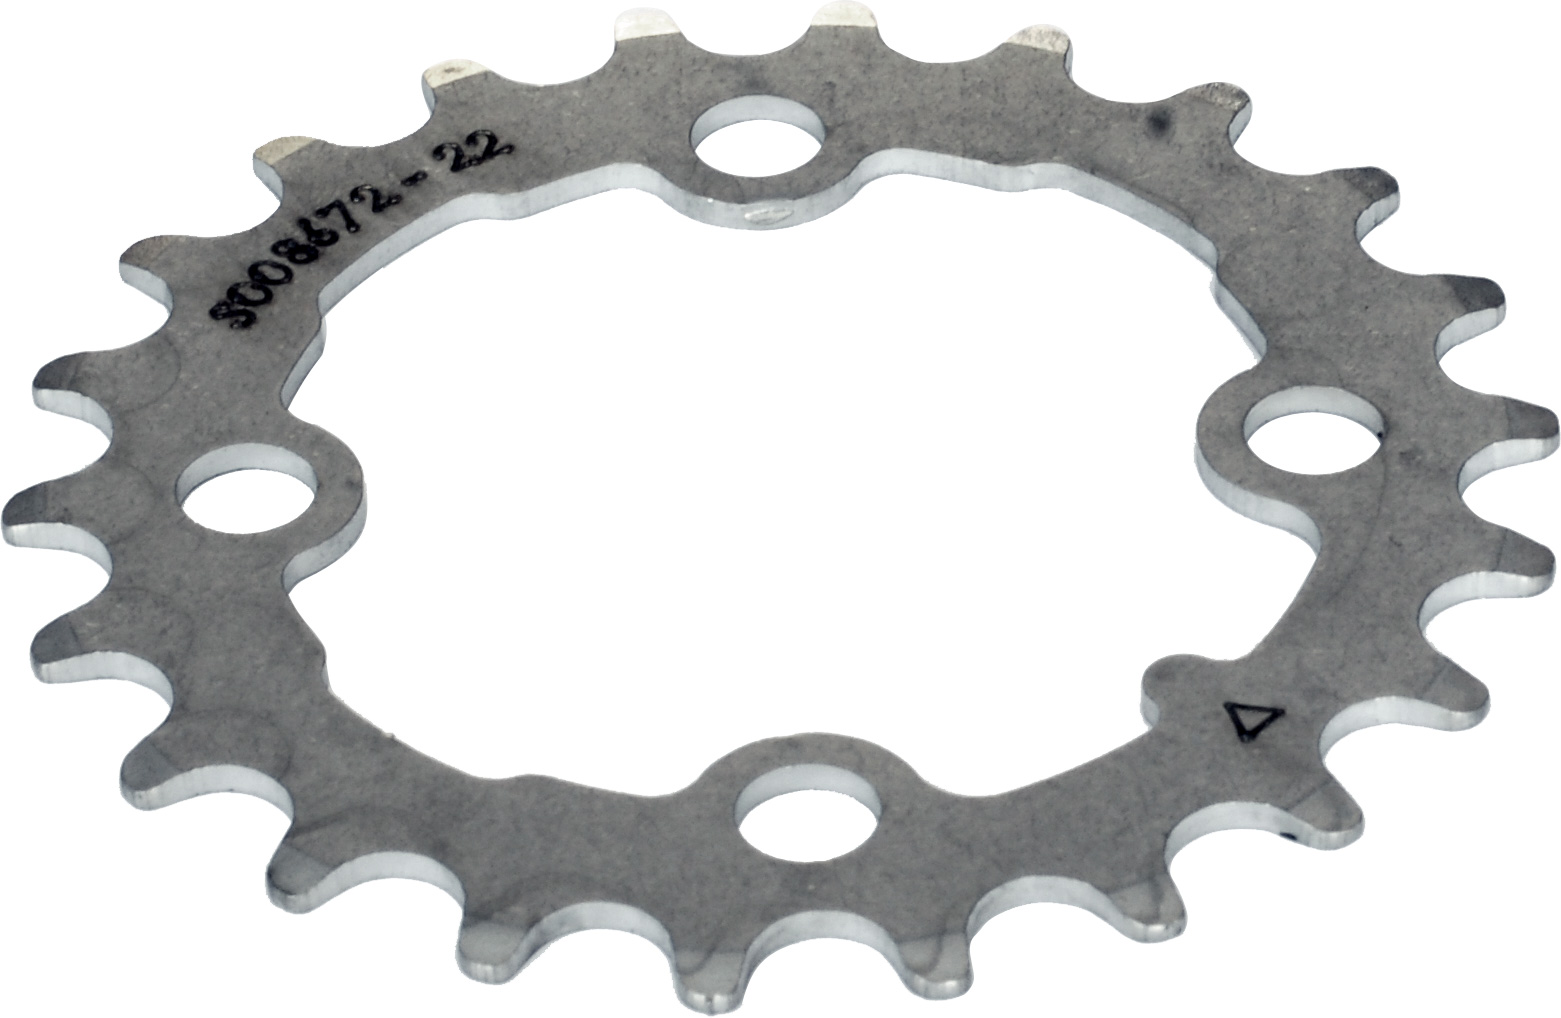 RXC64S22 Stronglight 4-Arm/64mm 22T Chainring